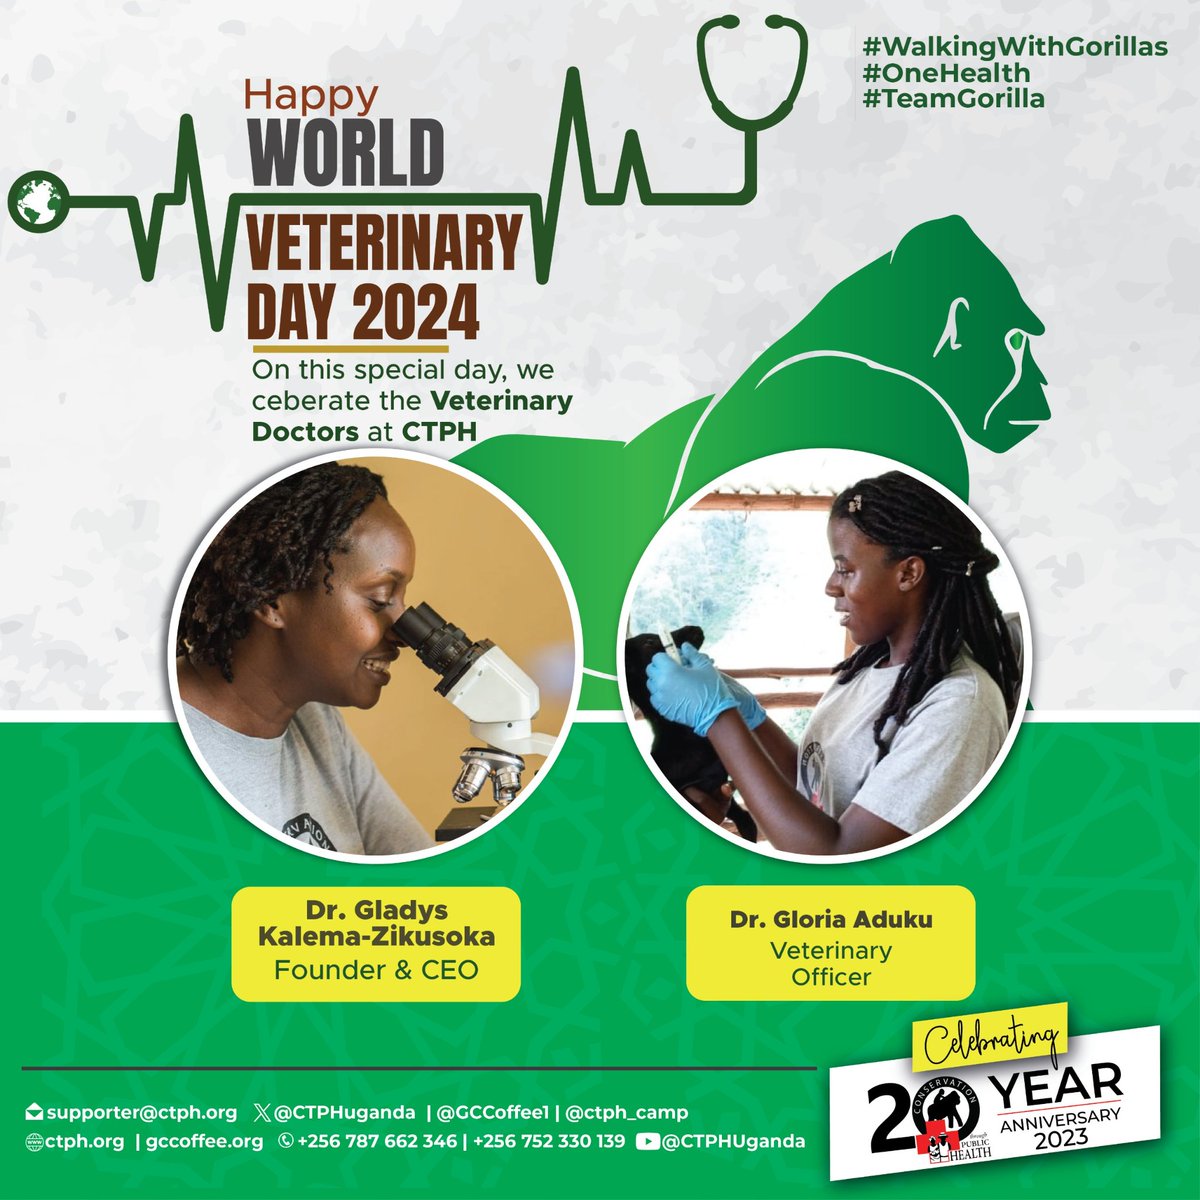 Happy World Veterinary Day. Just like this year's theme states, in our line of work, Veterinarians are Essential Health Workers. We salute you for your endless and tireless efforts in keeping our wildlife healthy through the #OneHealth approach. #WalkingWithGorillas